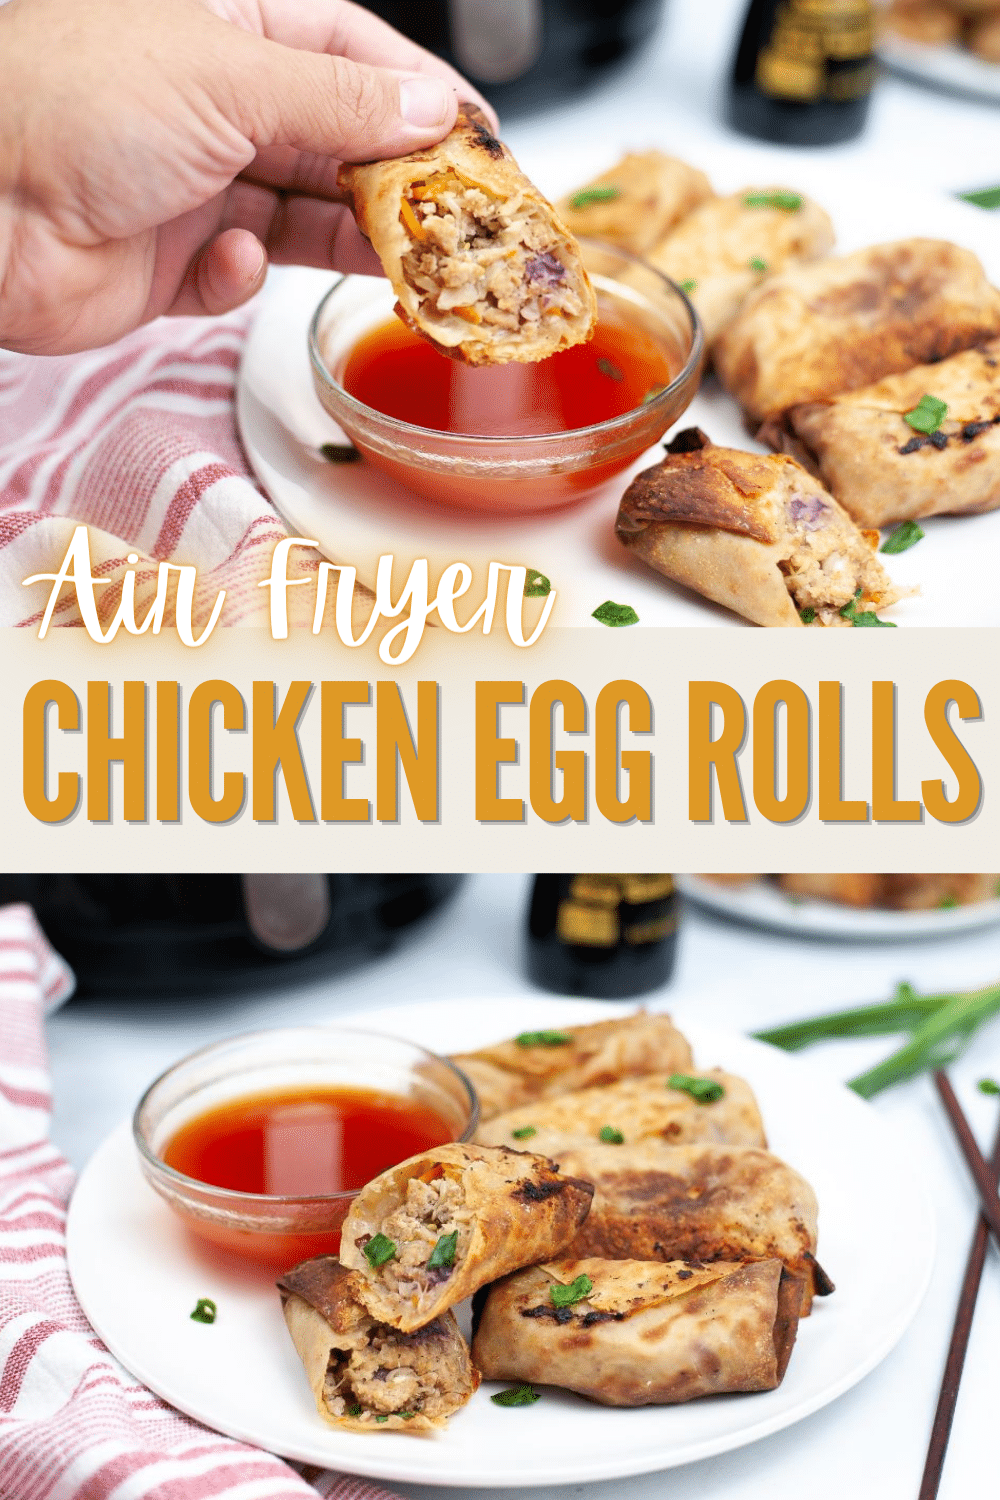 Air Fryer Chicken Egg Rolls are crispy on the outside and filled with chicken and vegetables. They're made quicker than ordering takeout! #airfryer #eggrolls #chicken #chinesefood #recipe via @wondermomwannab